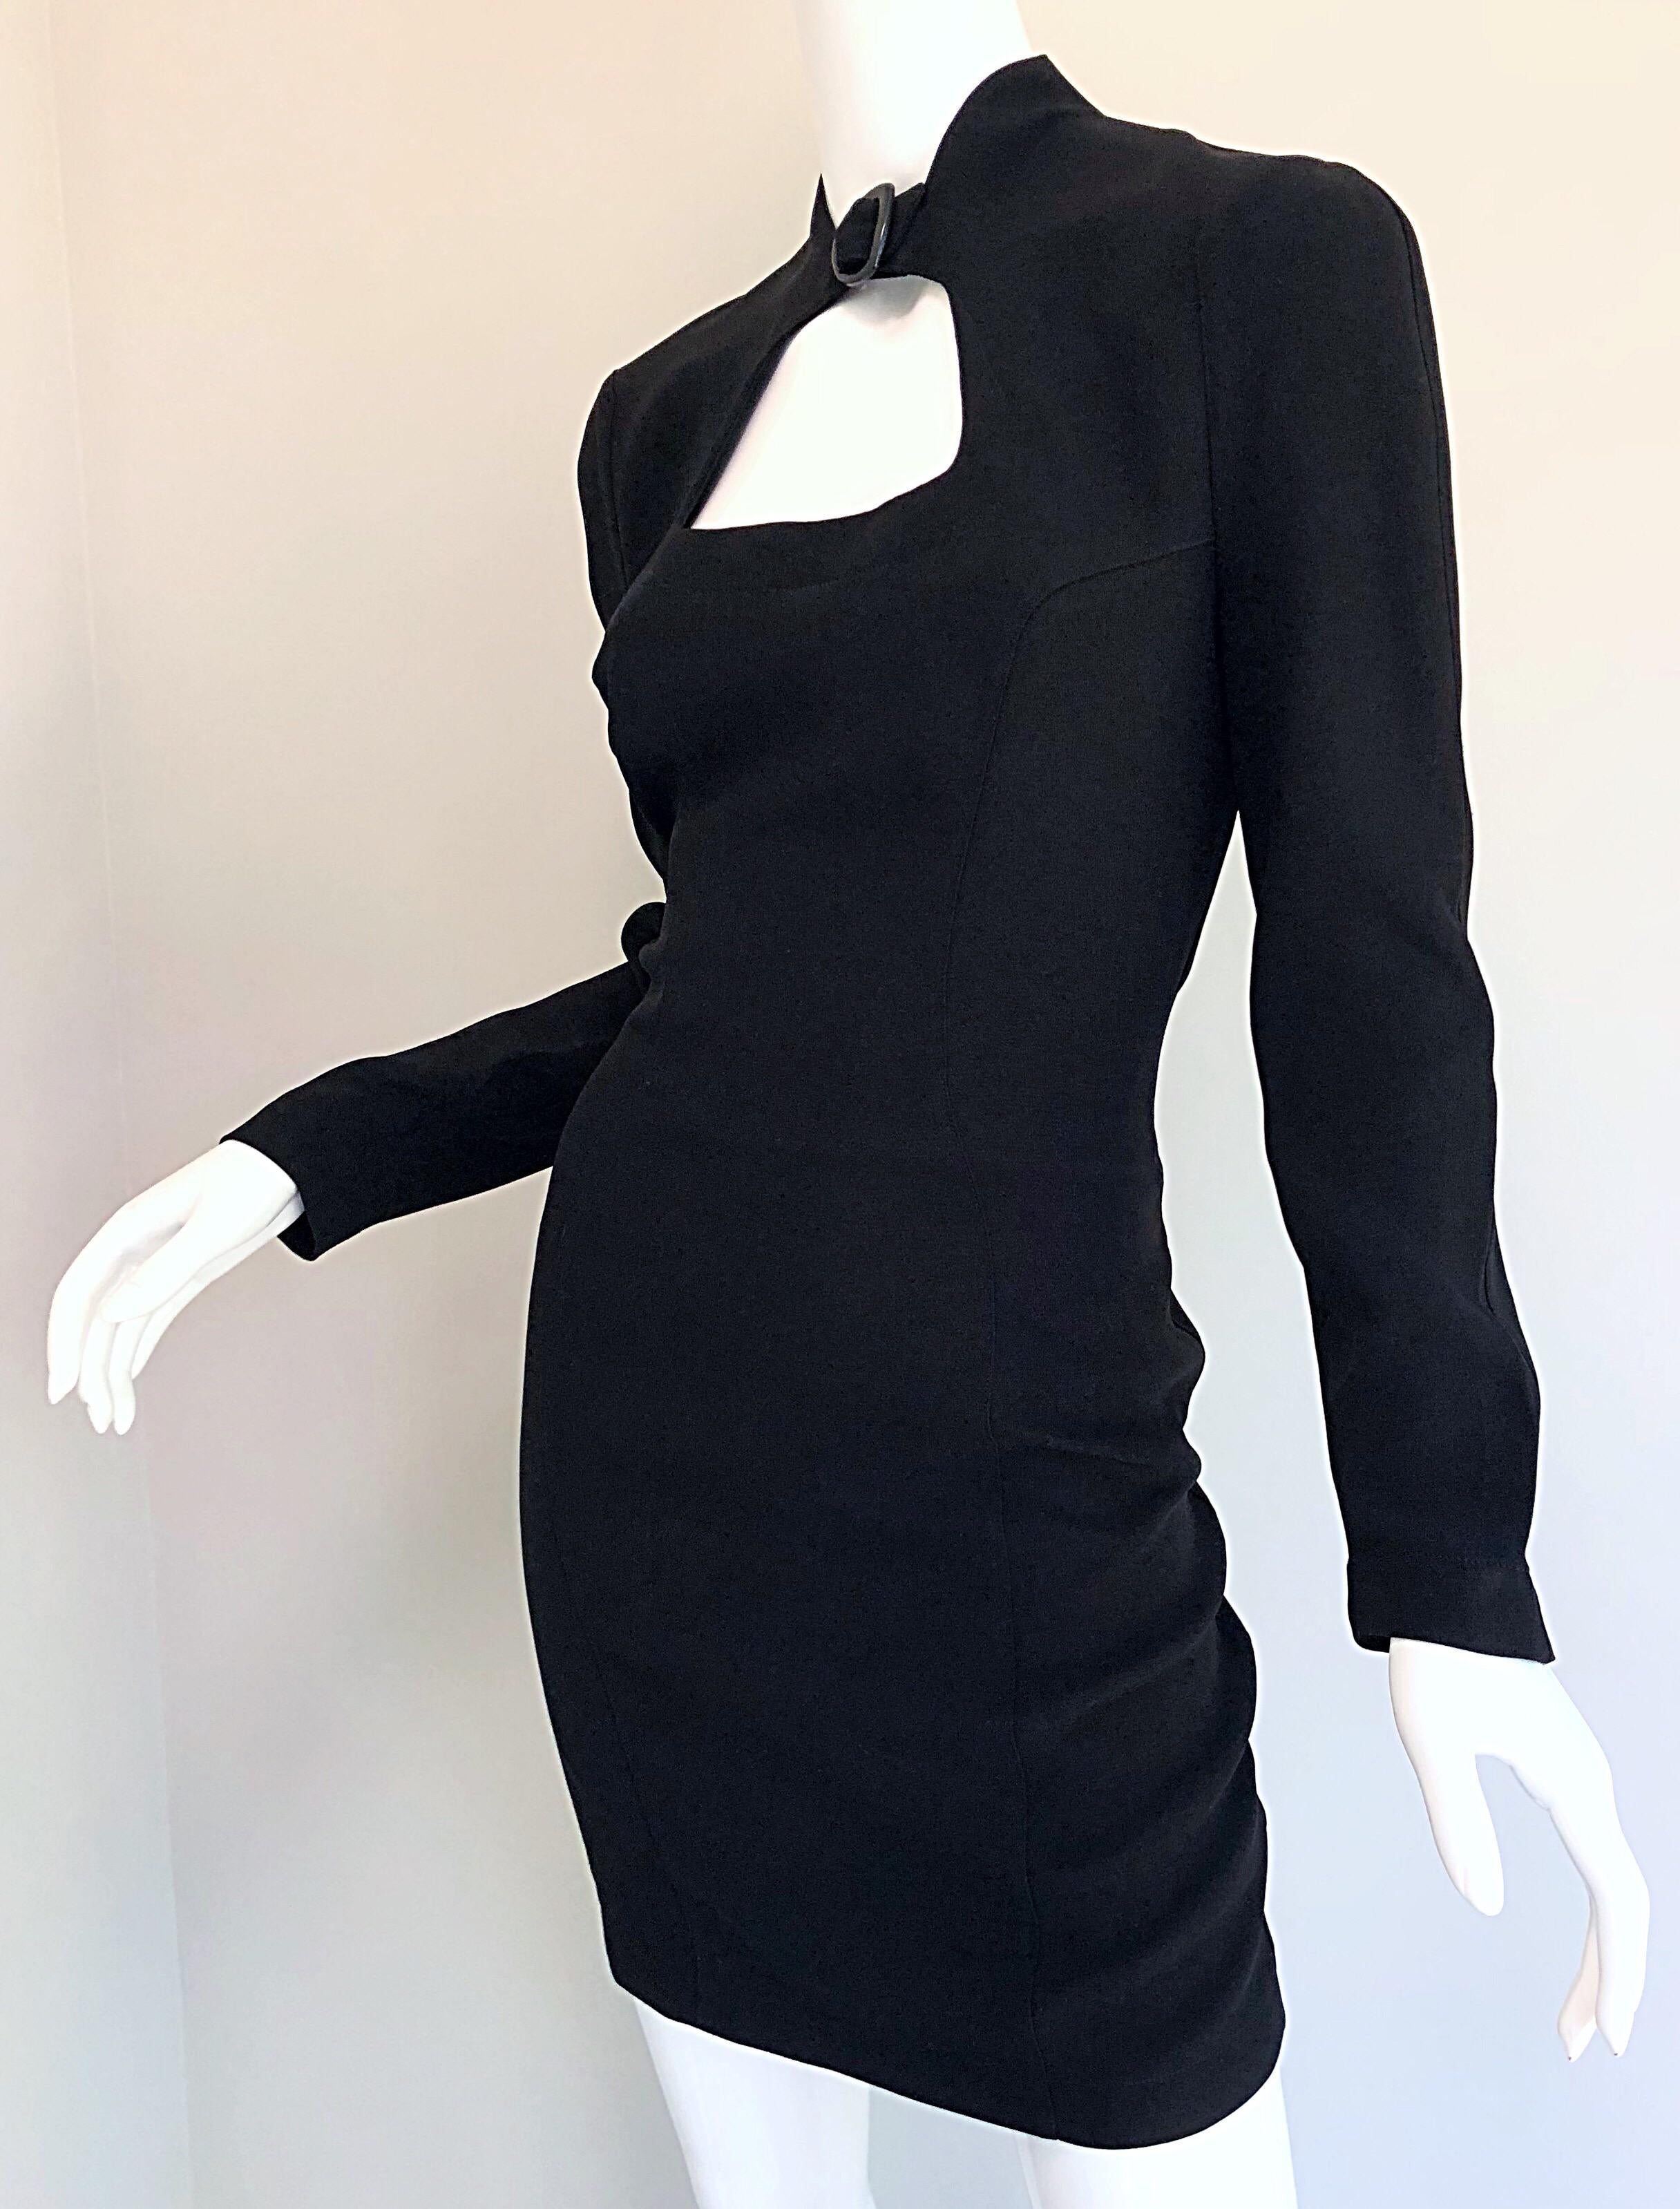 Iconic Vintage Thierry Mugler 80s Bondage Inspired Cut - Out Black 1980s Dress For Sale 1